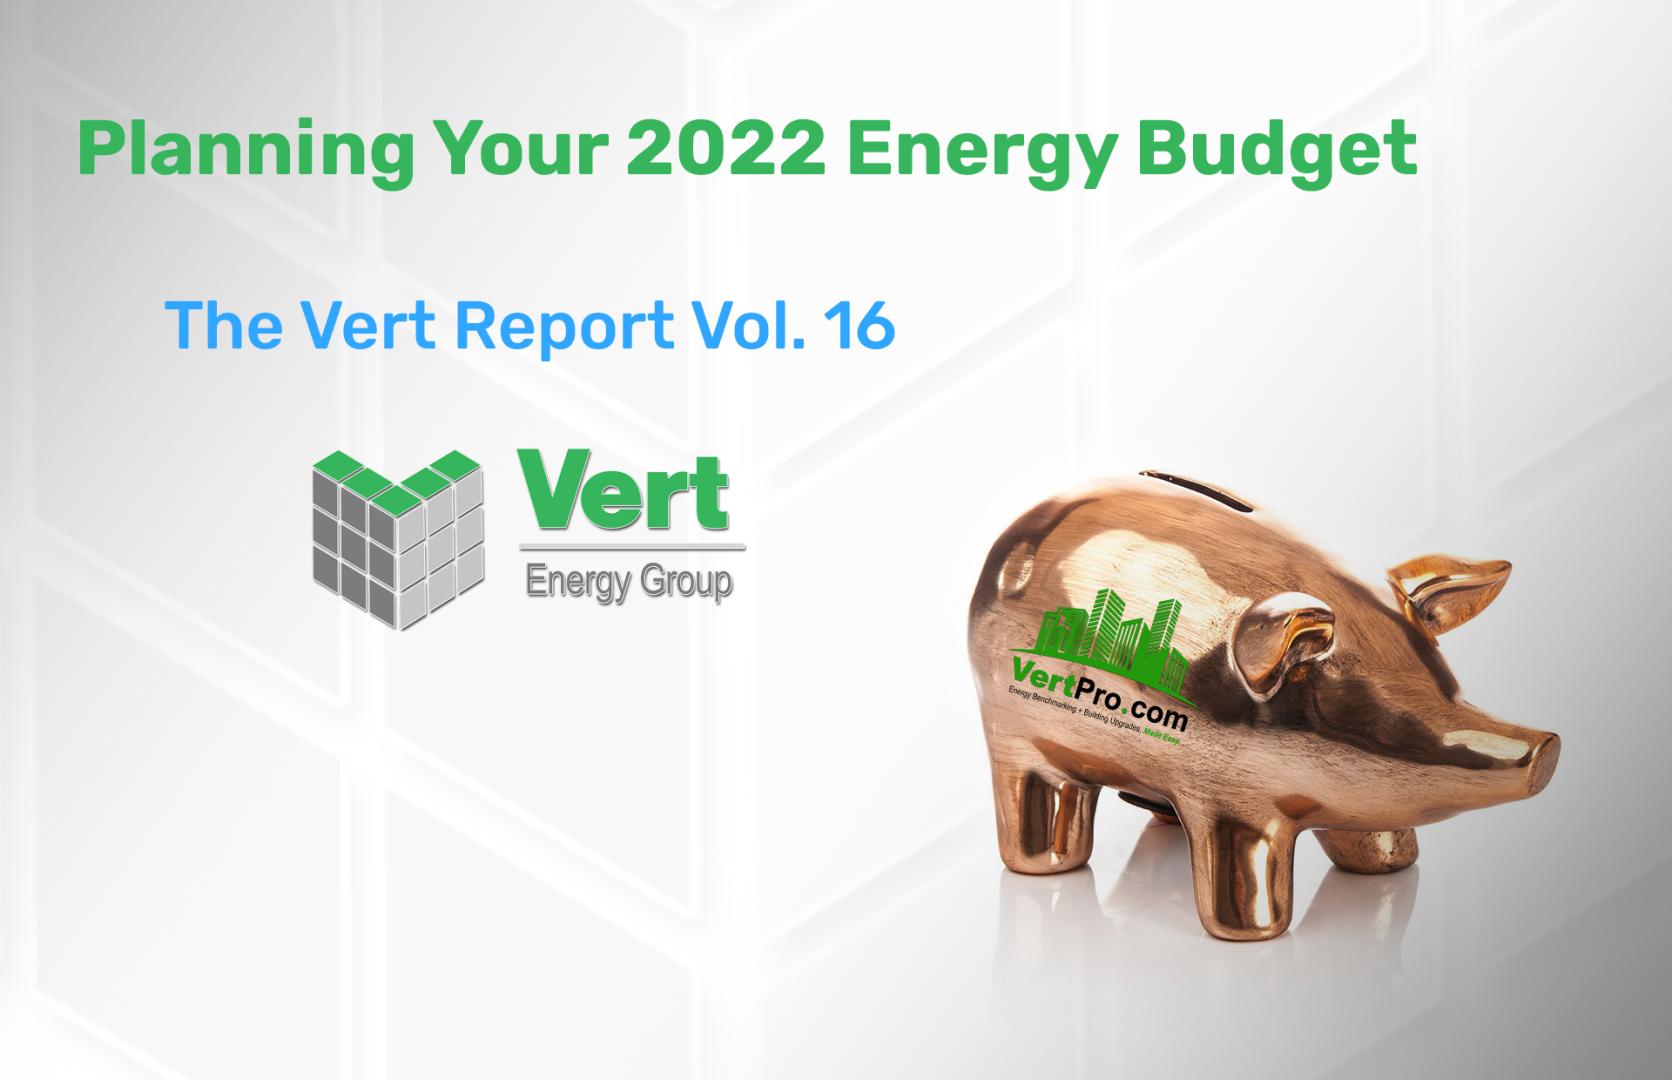 Planning Your 2022 Energy Budget